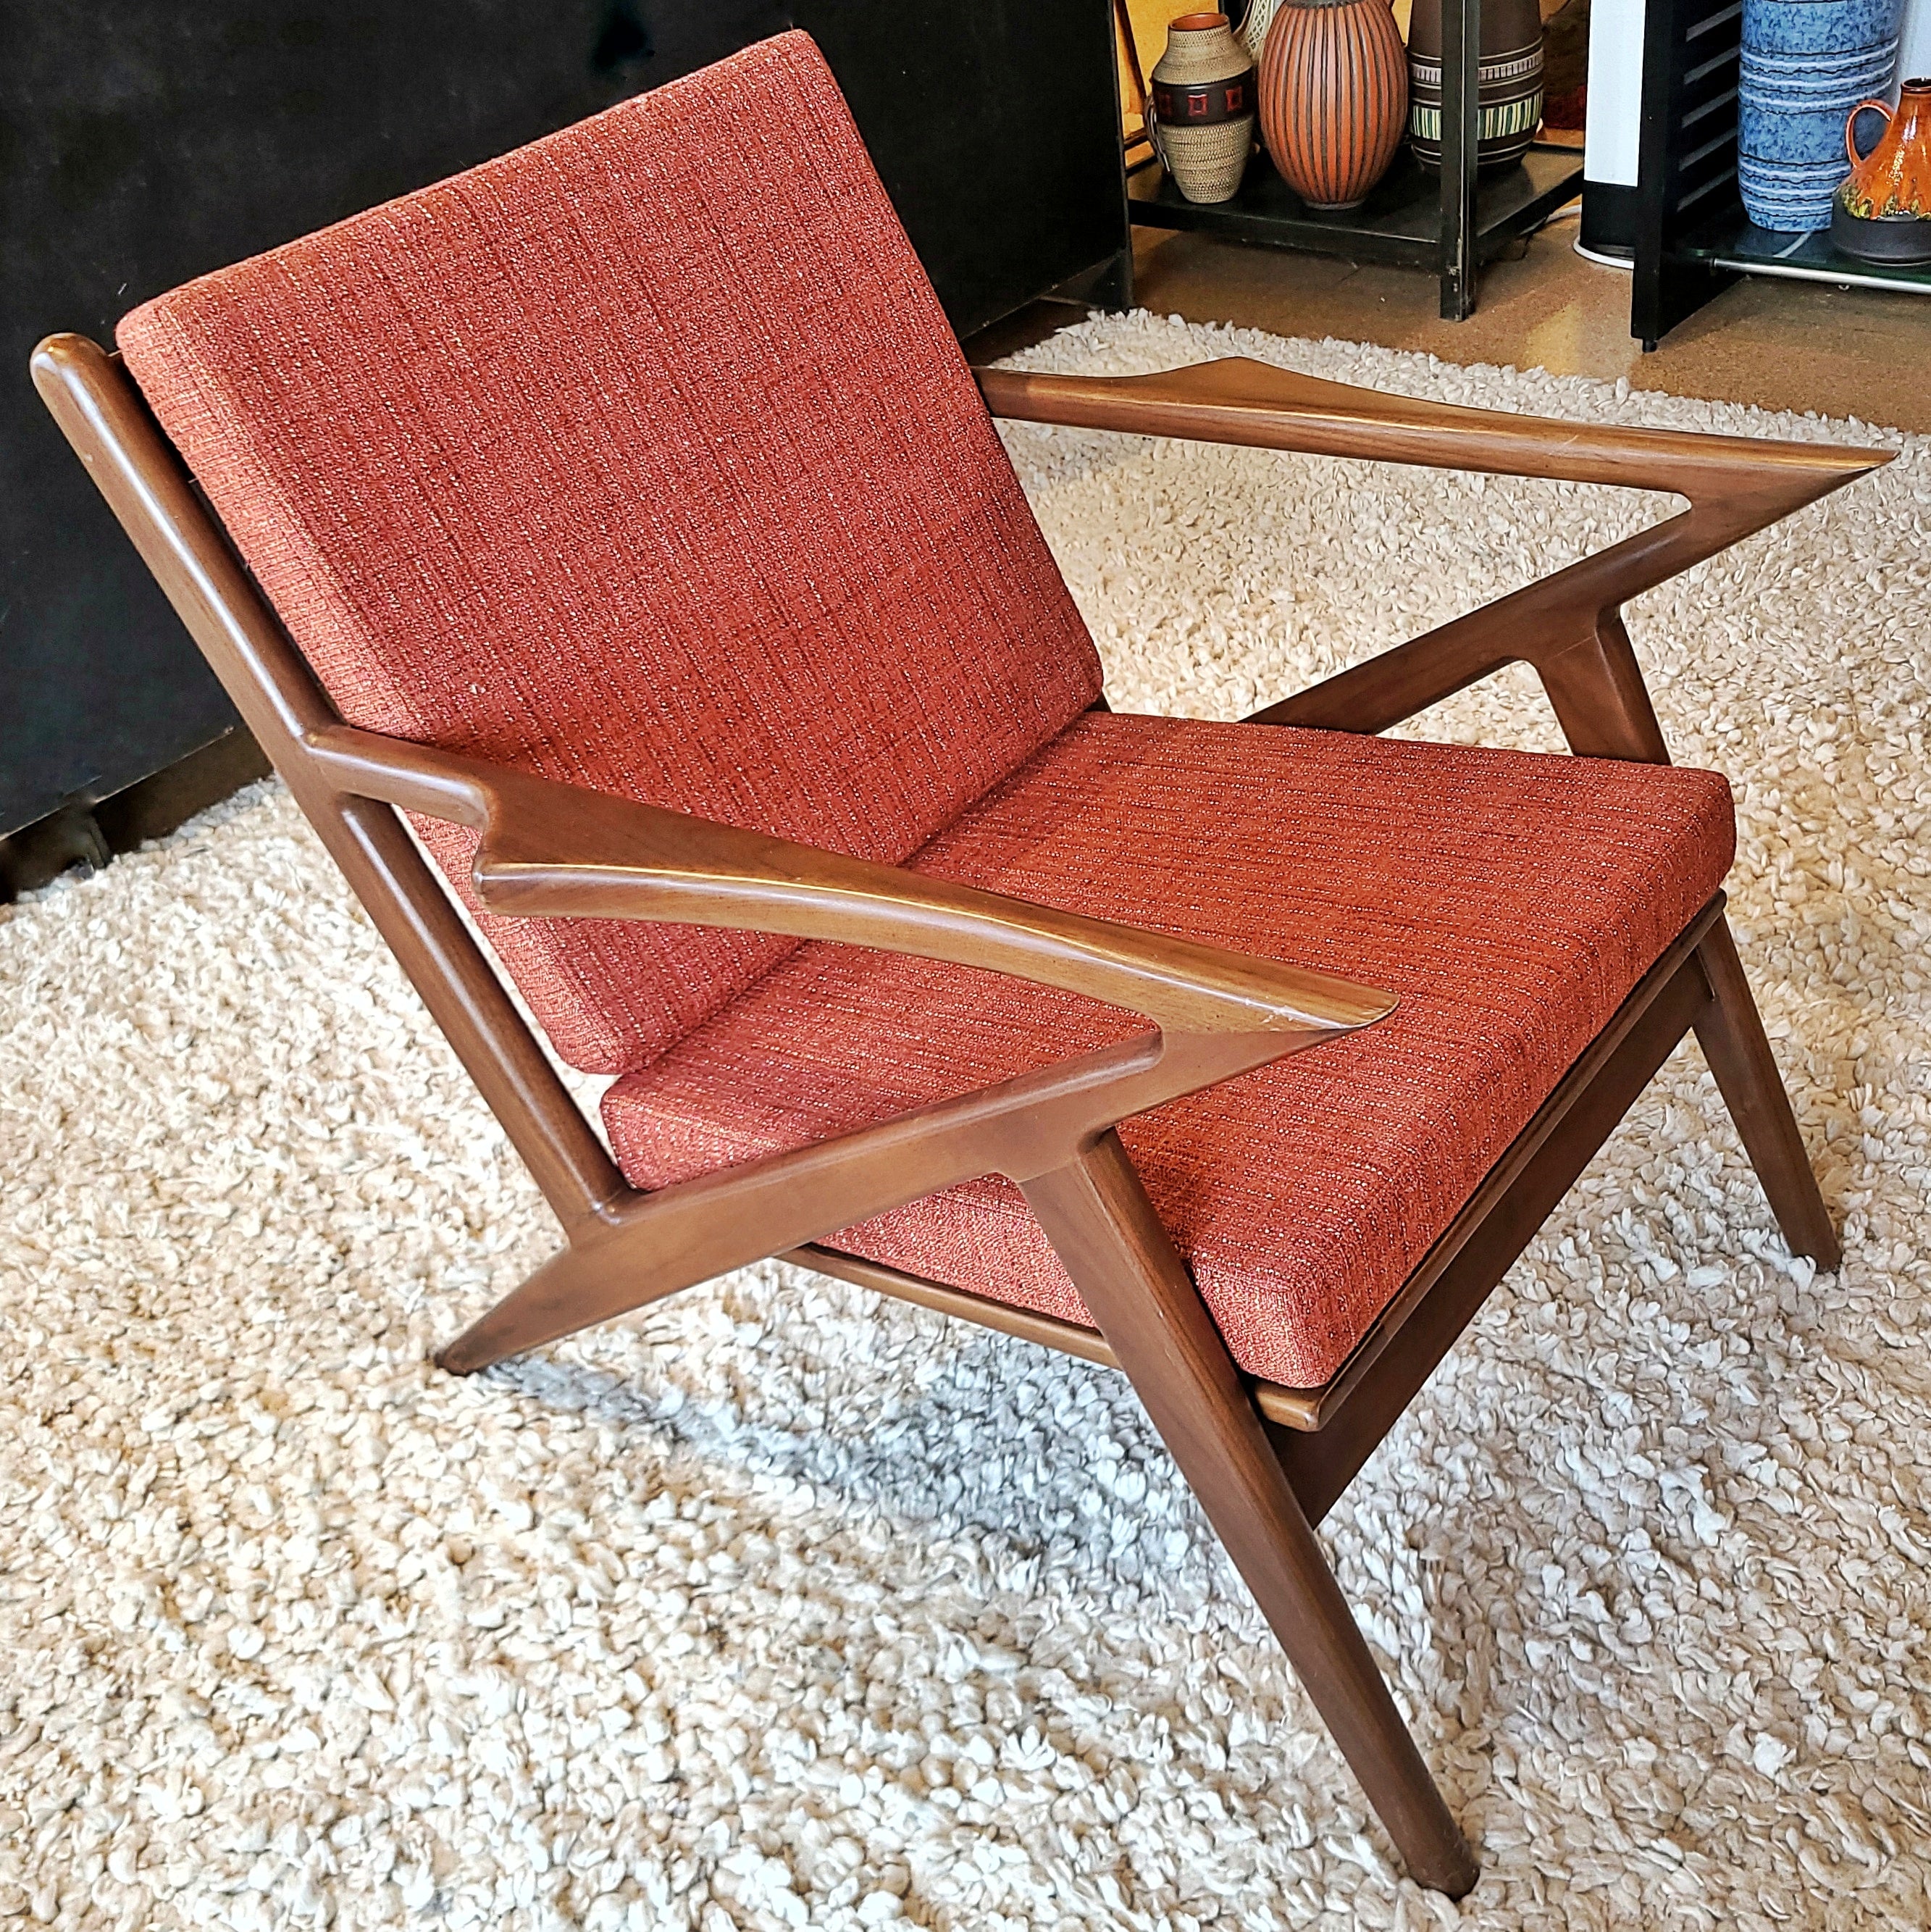 "Z" LOUNGE CHAIR IN THE STYLE OF POUL JENSEN